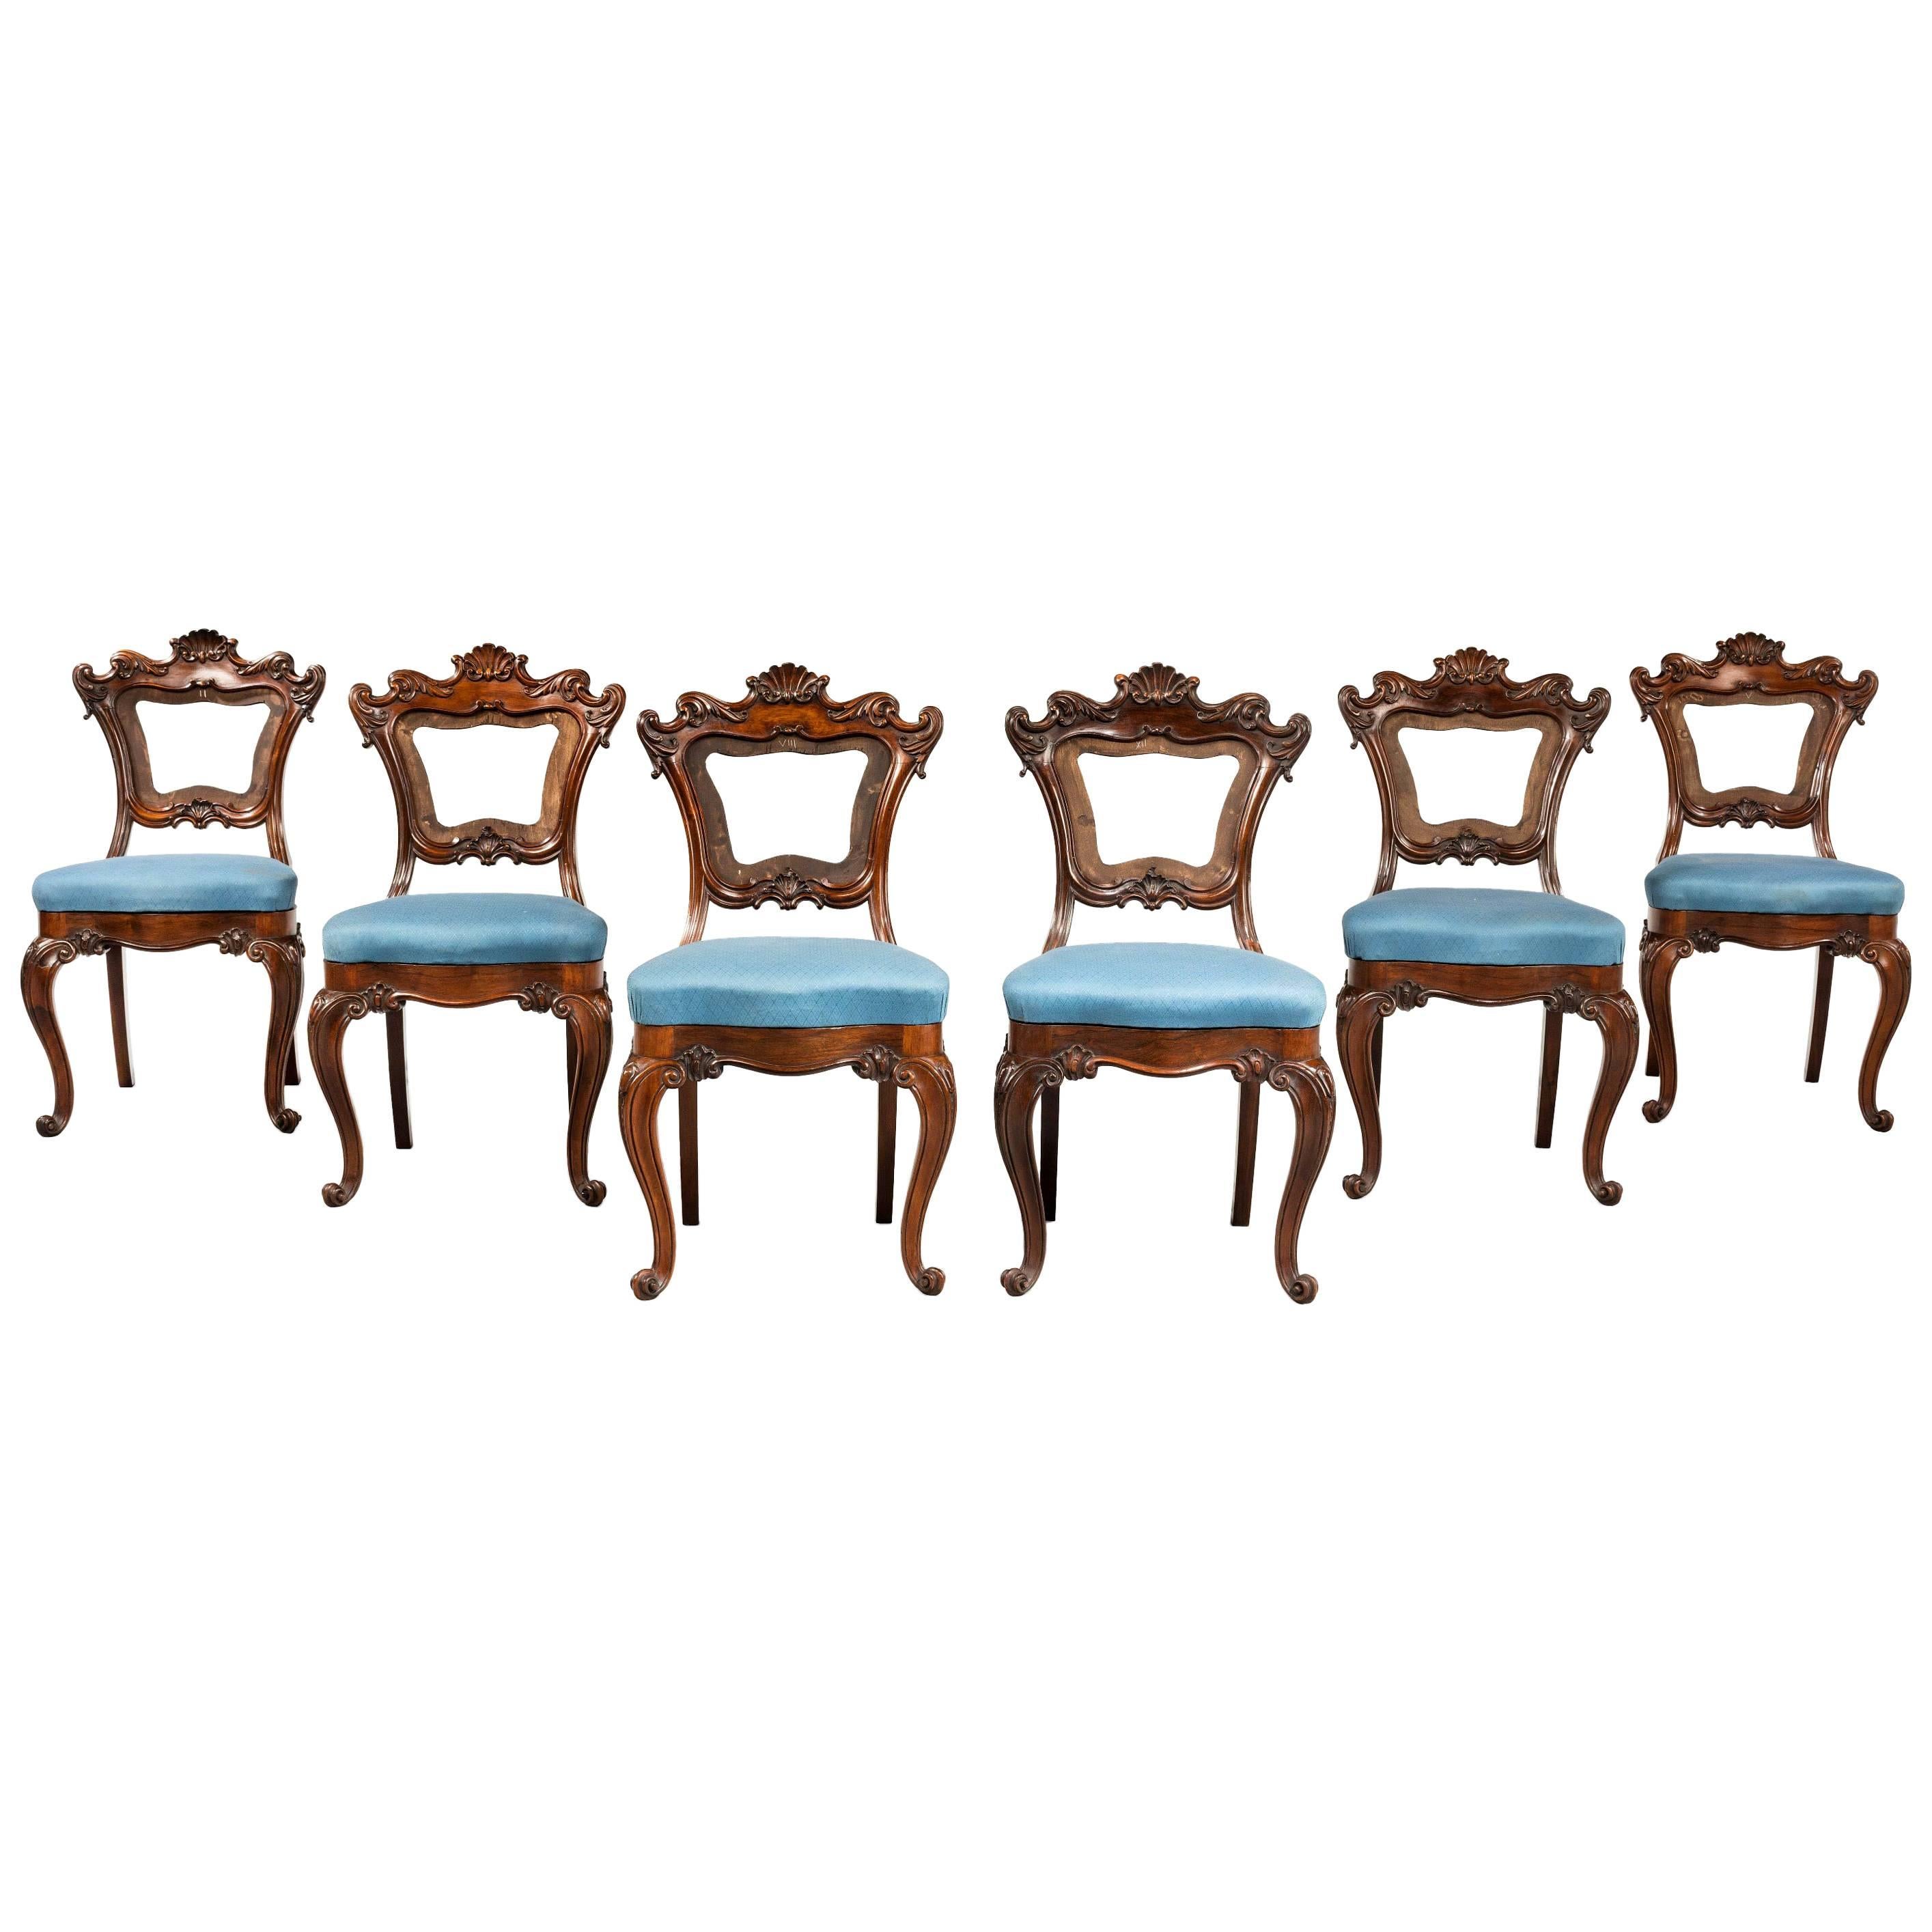 Set of Six Victorian Mahogany Framed Chairs of Elaborate Form